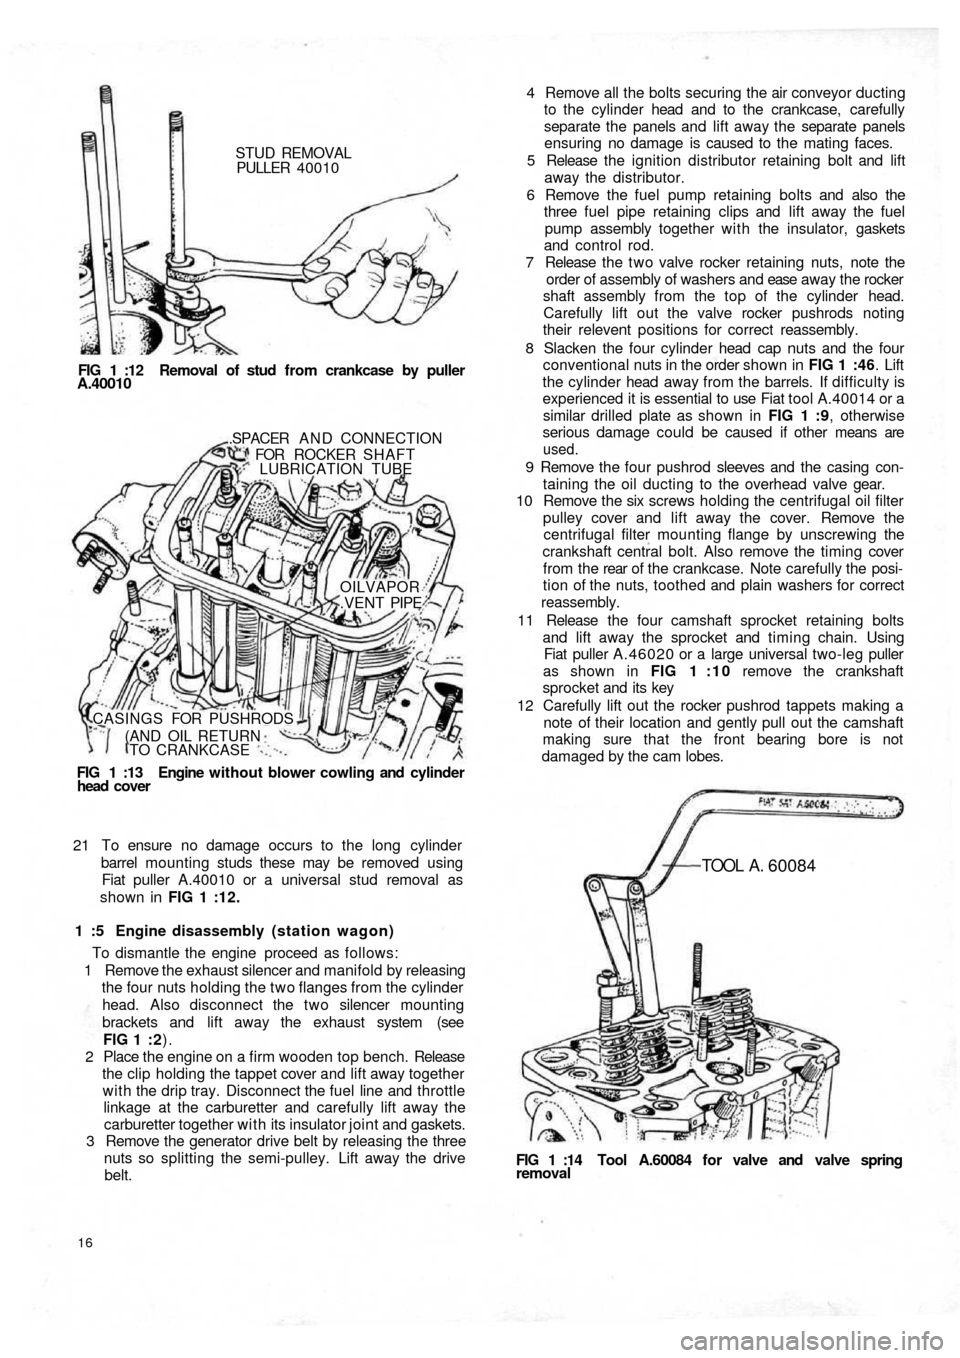 FIAT 500 1957 1.G Workshop Manual STUD REMOVAL
PULLER  40010
FIG 1 :12  Removal of stud from crankcase by puller
A.40010
FIG  1  :13   Engine  without blower cowling and cylinder
head  cover.SPACER  A N D  CONNECTION
FOR ROCKER SHAFT
